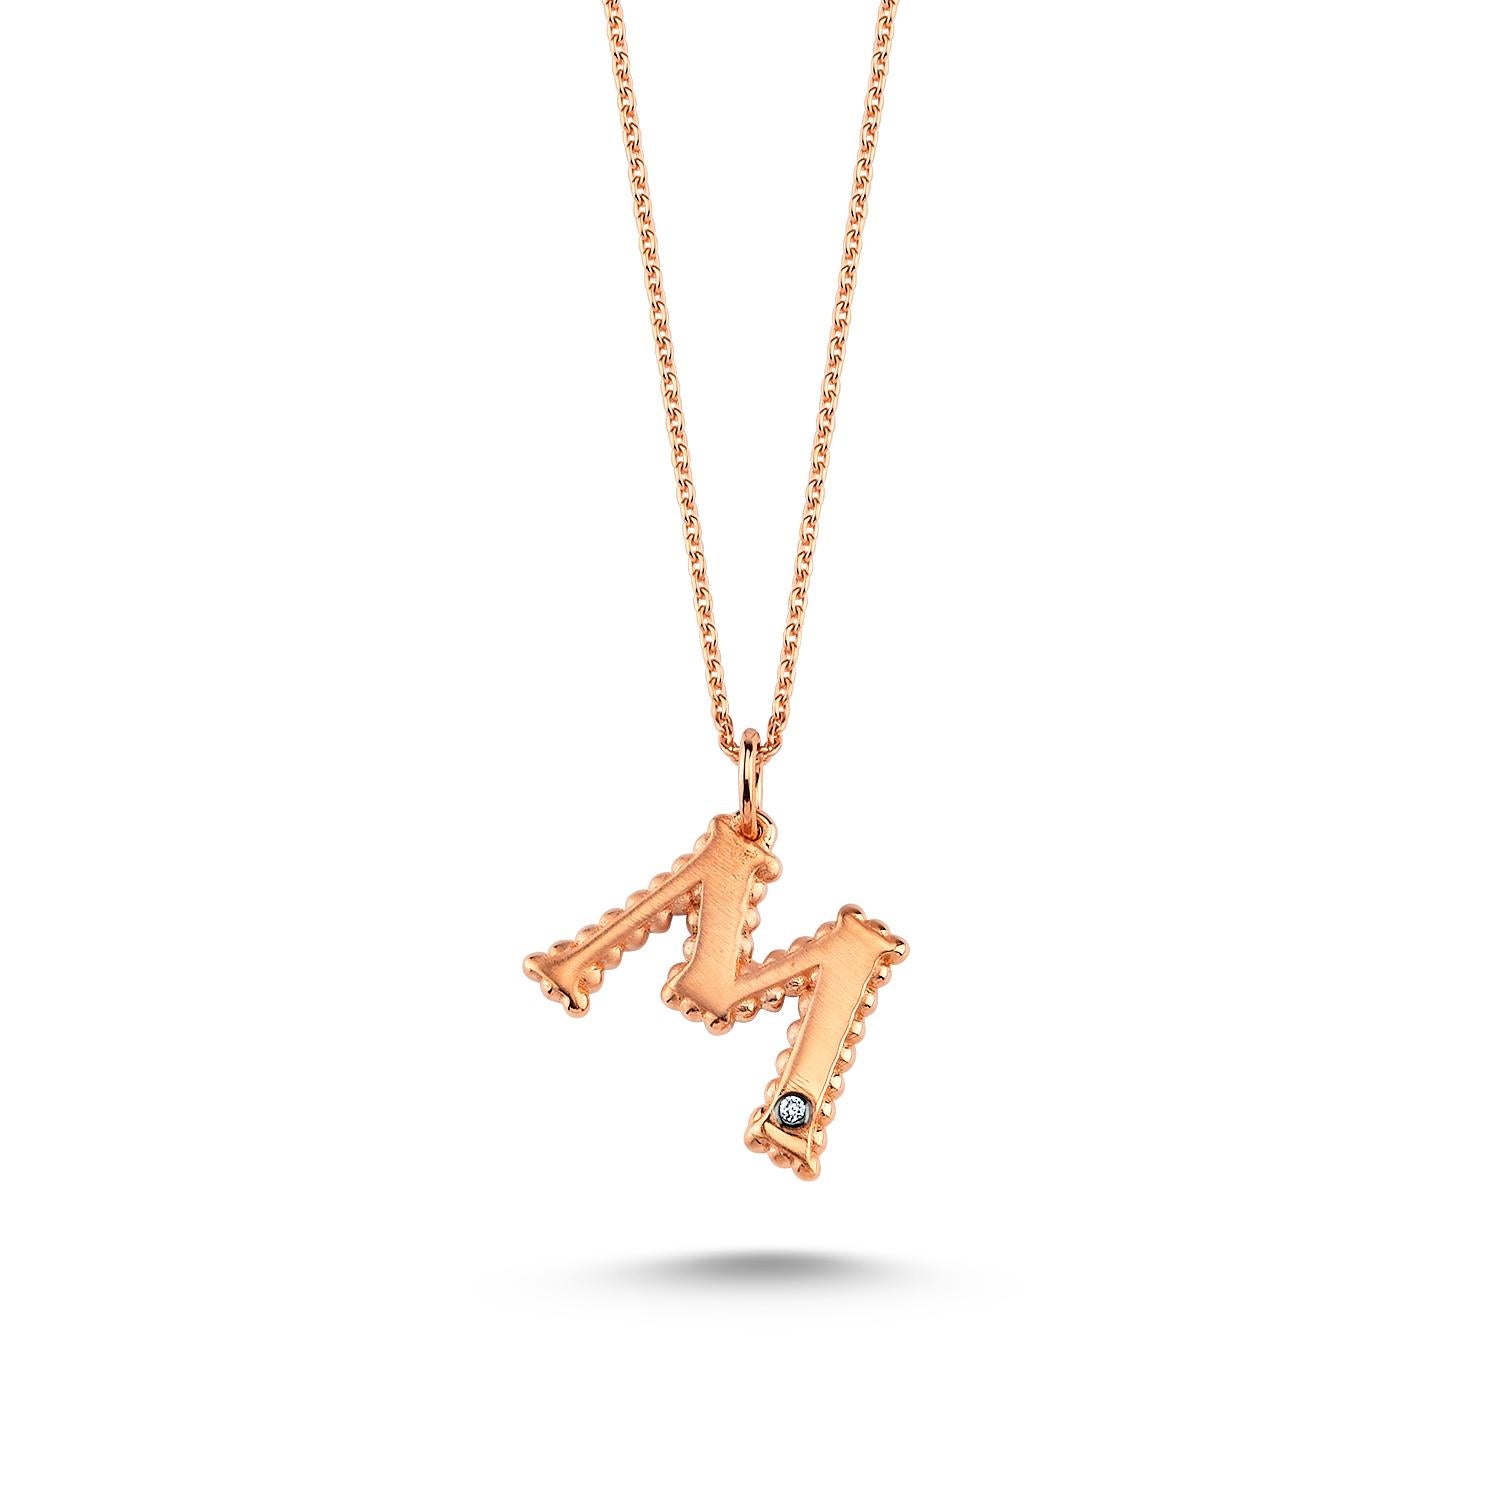 M large necklace in 14k rose gold with white diamond by Selda Jewellery

Additional Information:-
Collection: Letter Collection
14k Rose gold
0.01ct White diamond
Pendant height 1cm
Chain length 44cm